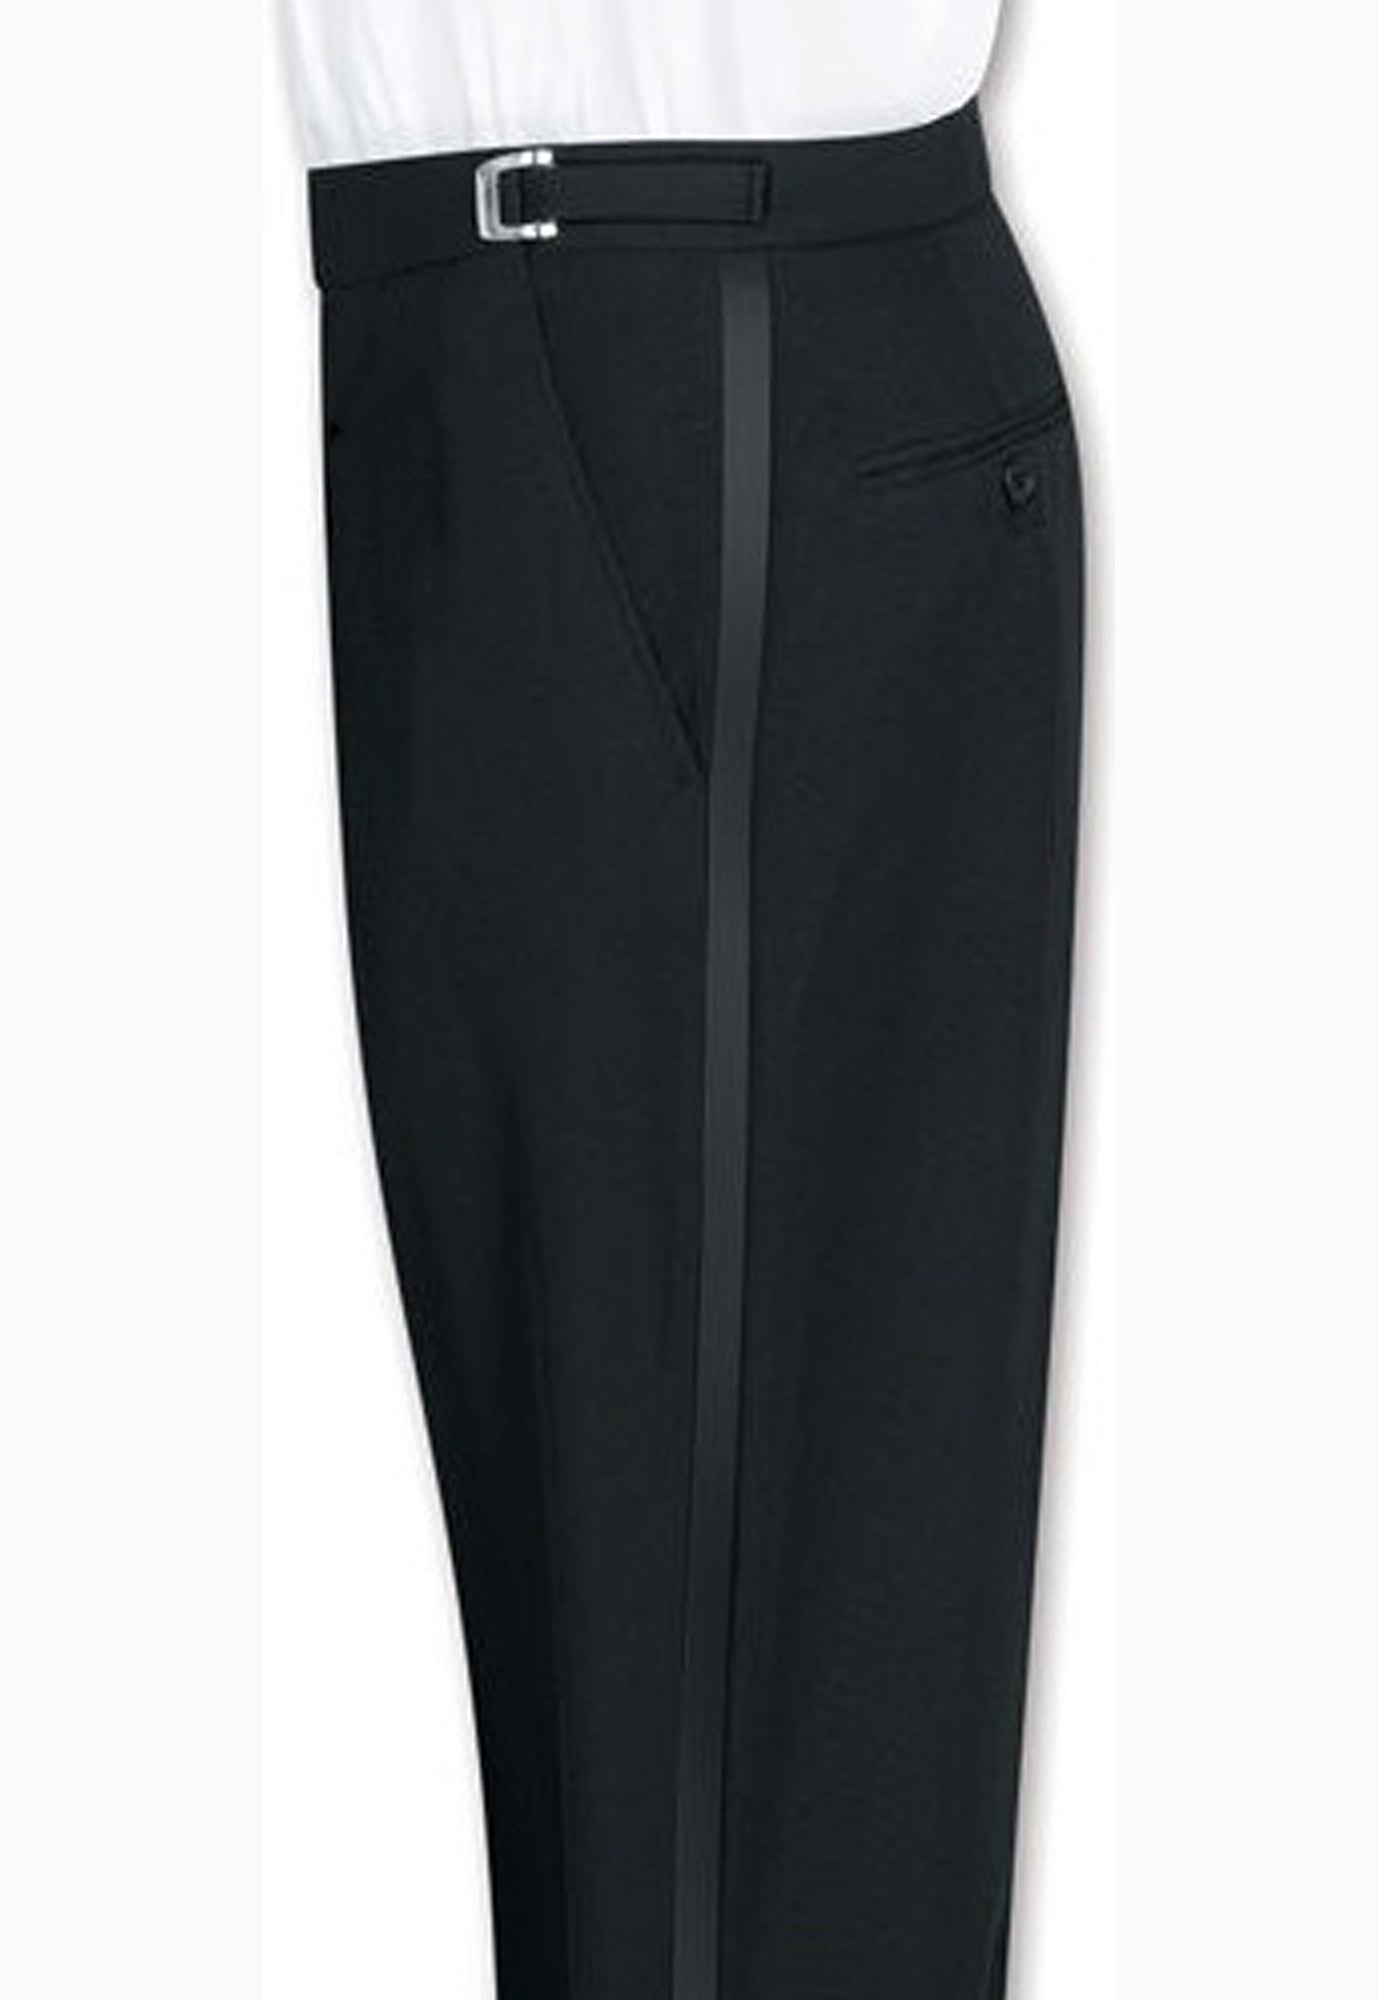 RGM Mens Tuxedo Pants Side Satin Stripe  Pleated Or Flat Front 28W x 30L  at Amazon Mens Clothing store